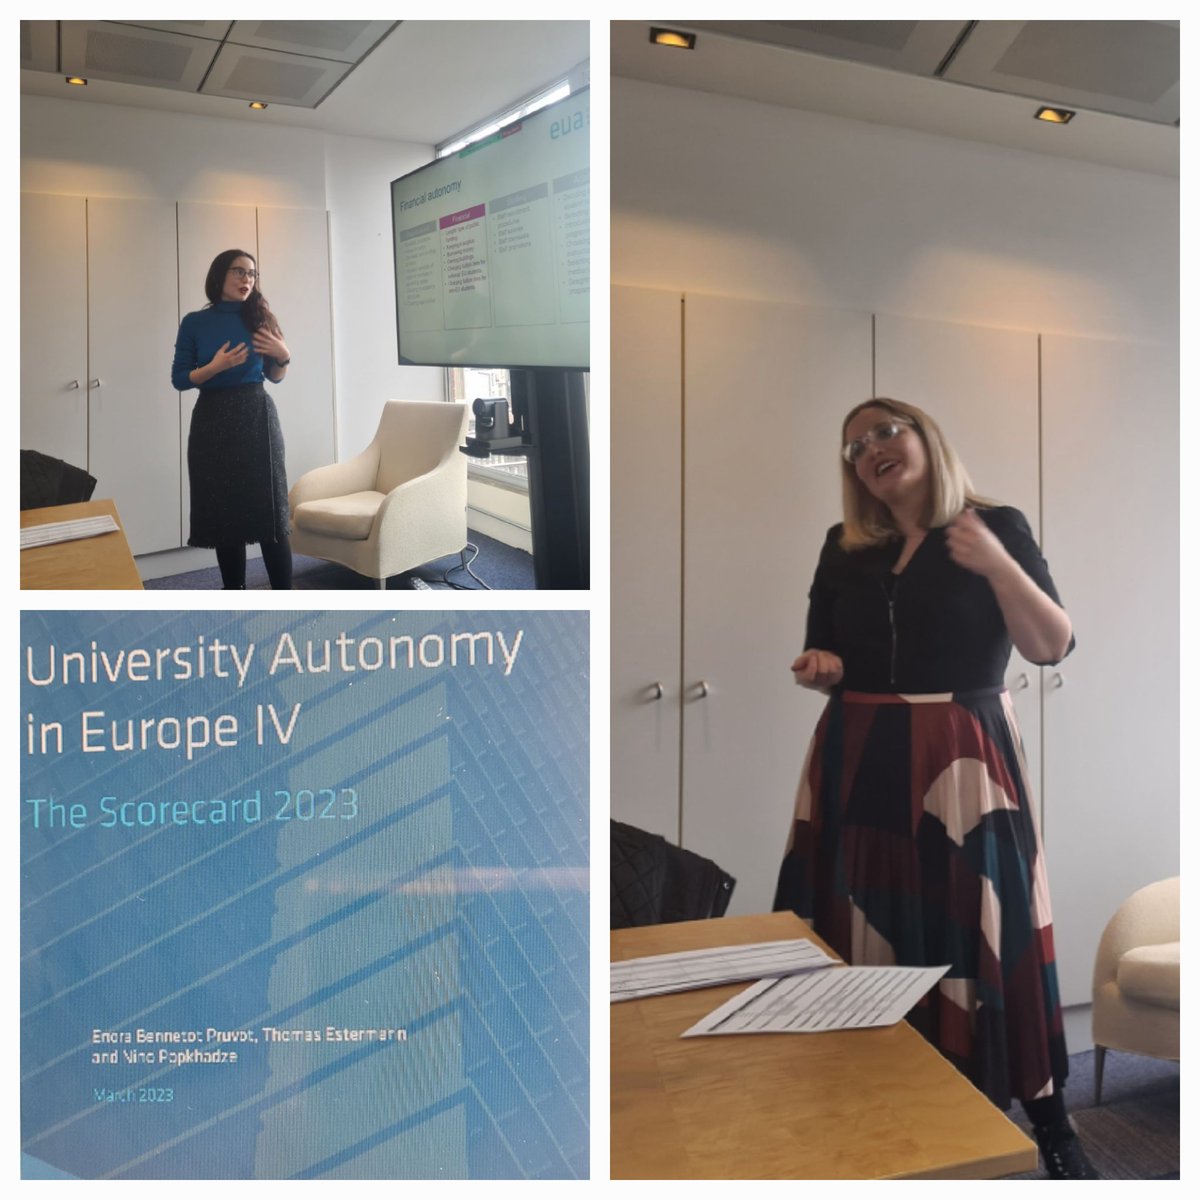 Today first presentations of the new @euatweets #AutonomyScorecard in #Westernbalkan context. By @EnoraPruvot first at @eqar_he #HigherEducation Ministries +QAAs followed by @PopkhadzeNino at #STAND project meeting.